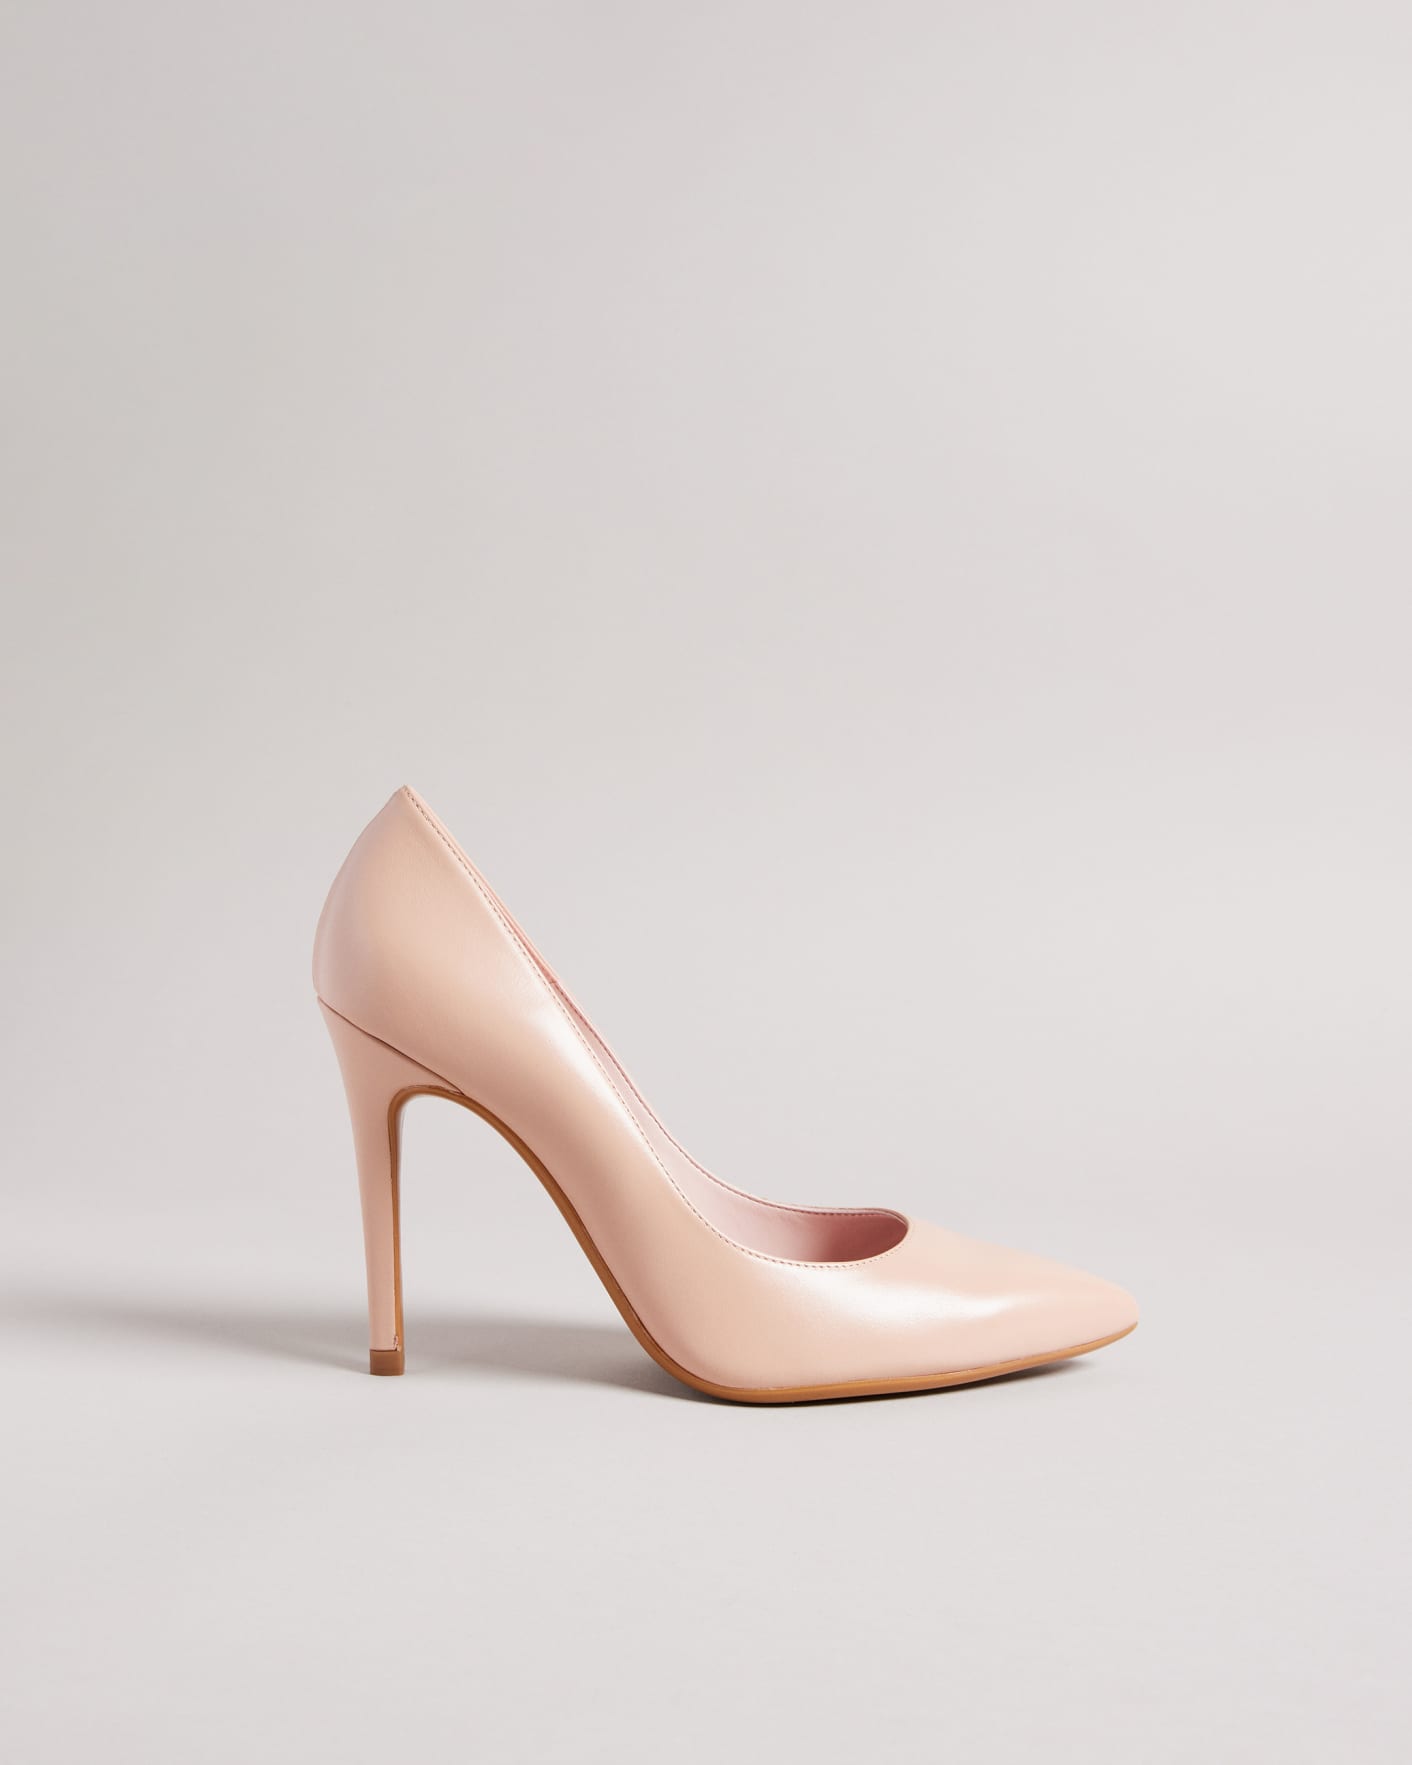 LOPSEY - DUSKY-PINK, Shoes